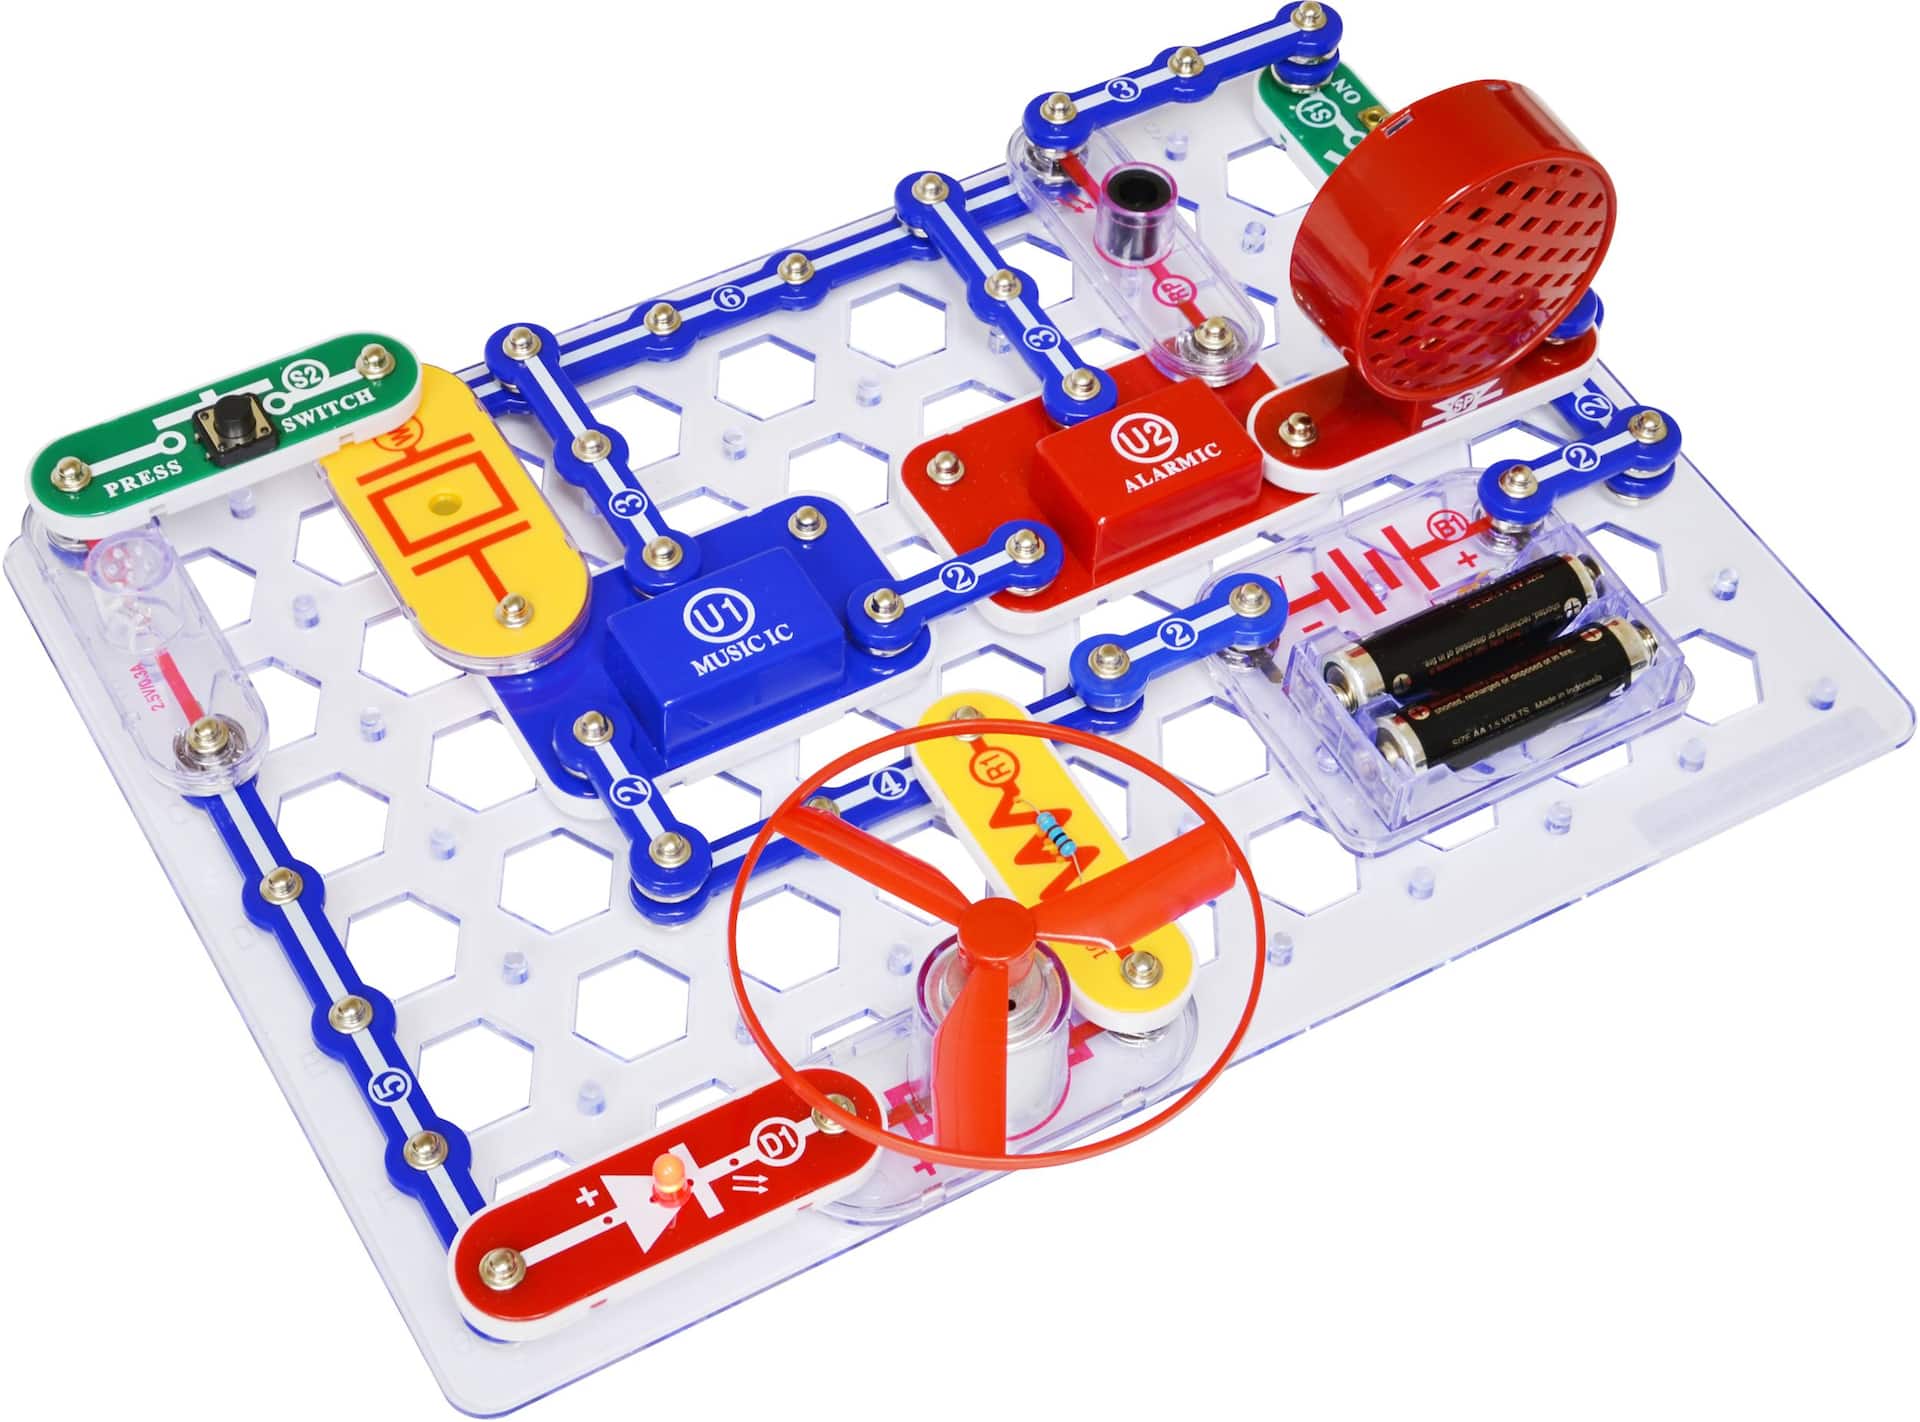 Snap Circuits Review and a DIY Spin Art Machine - TinkerLab